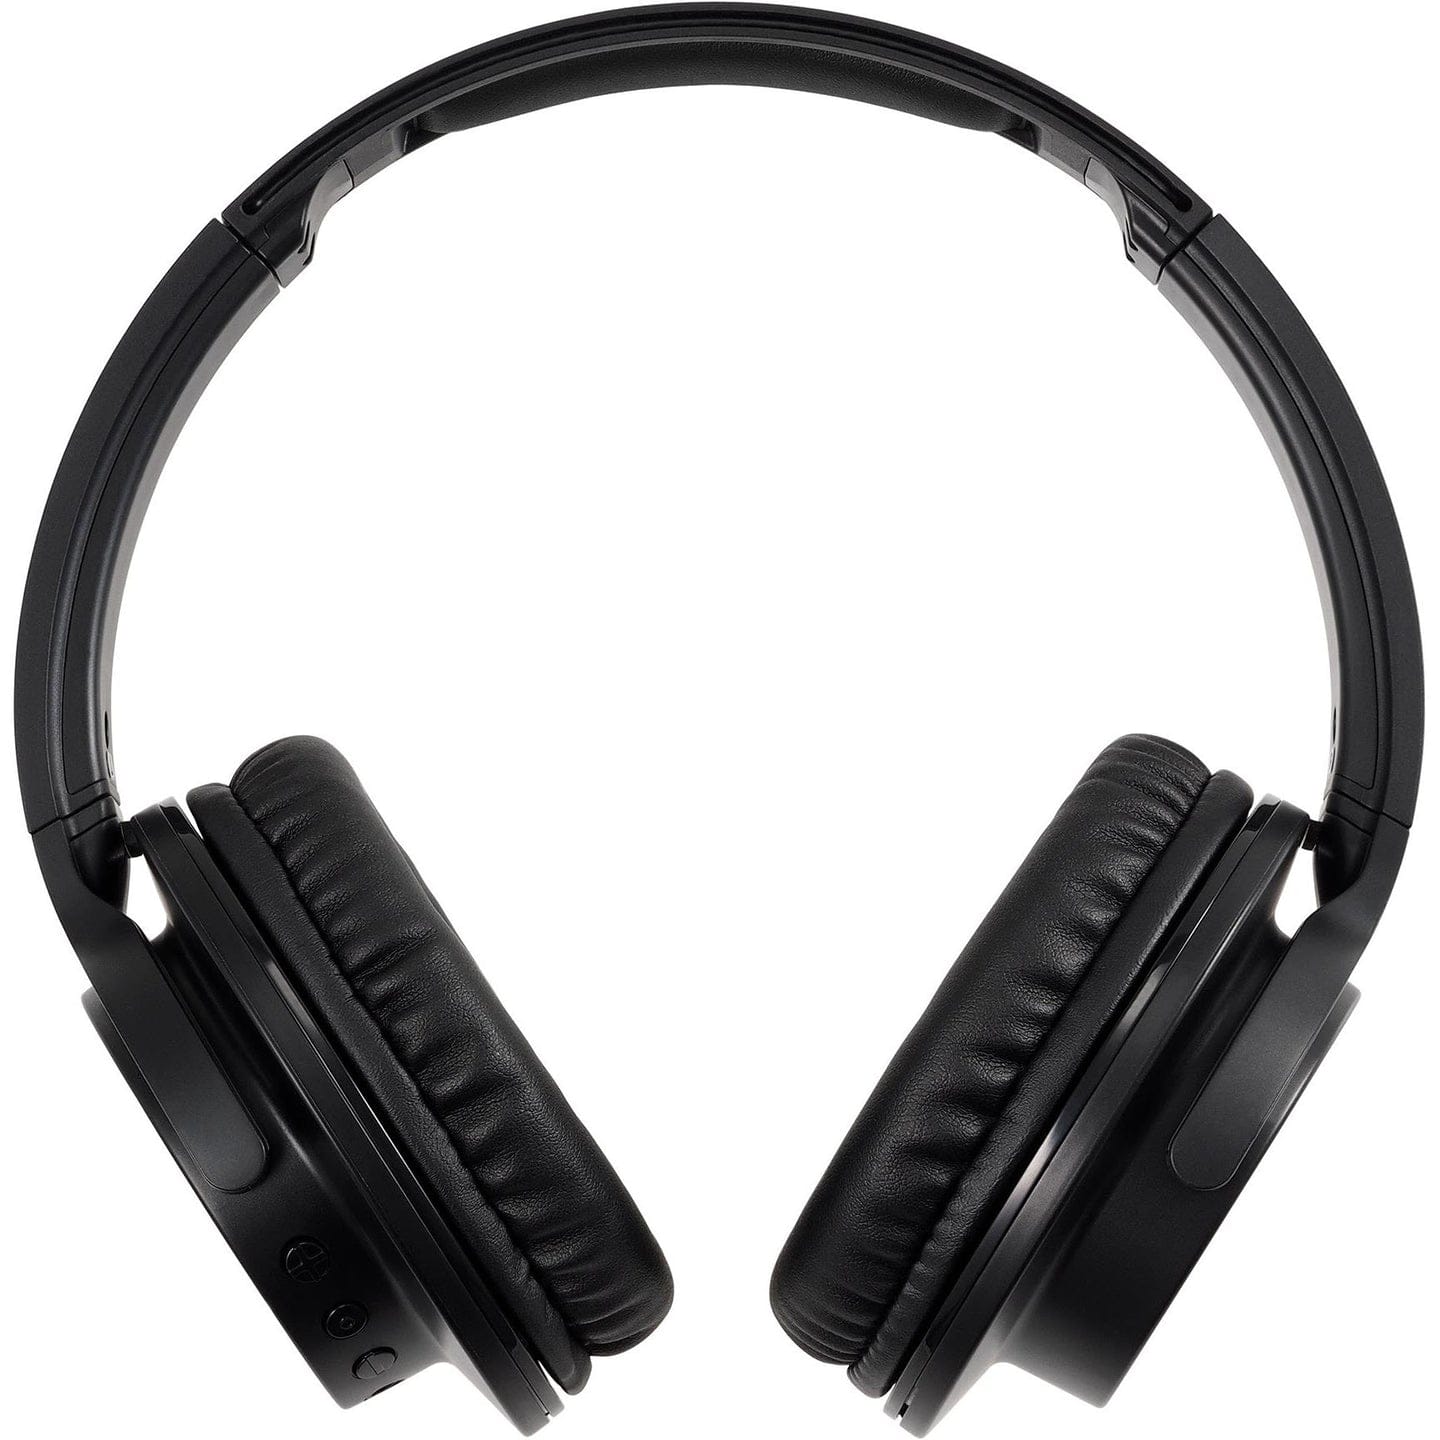 Audio-Technical Over-Ear Wireless Noise Cancelling Headphones (Black)